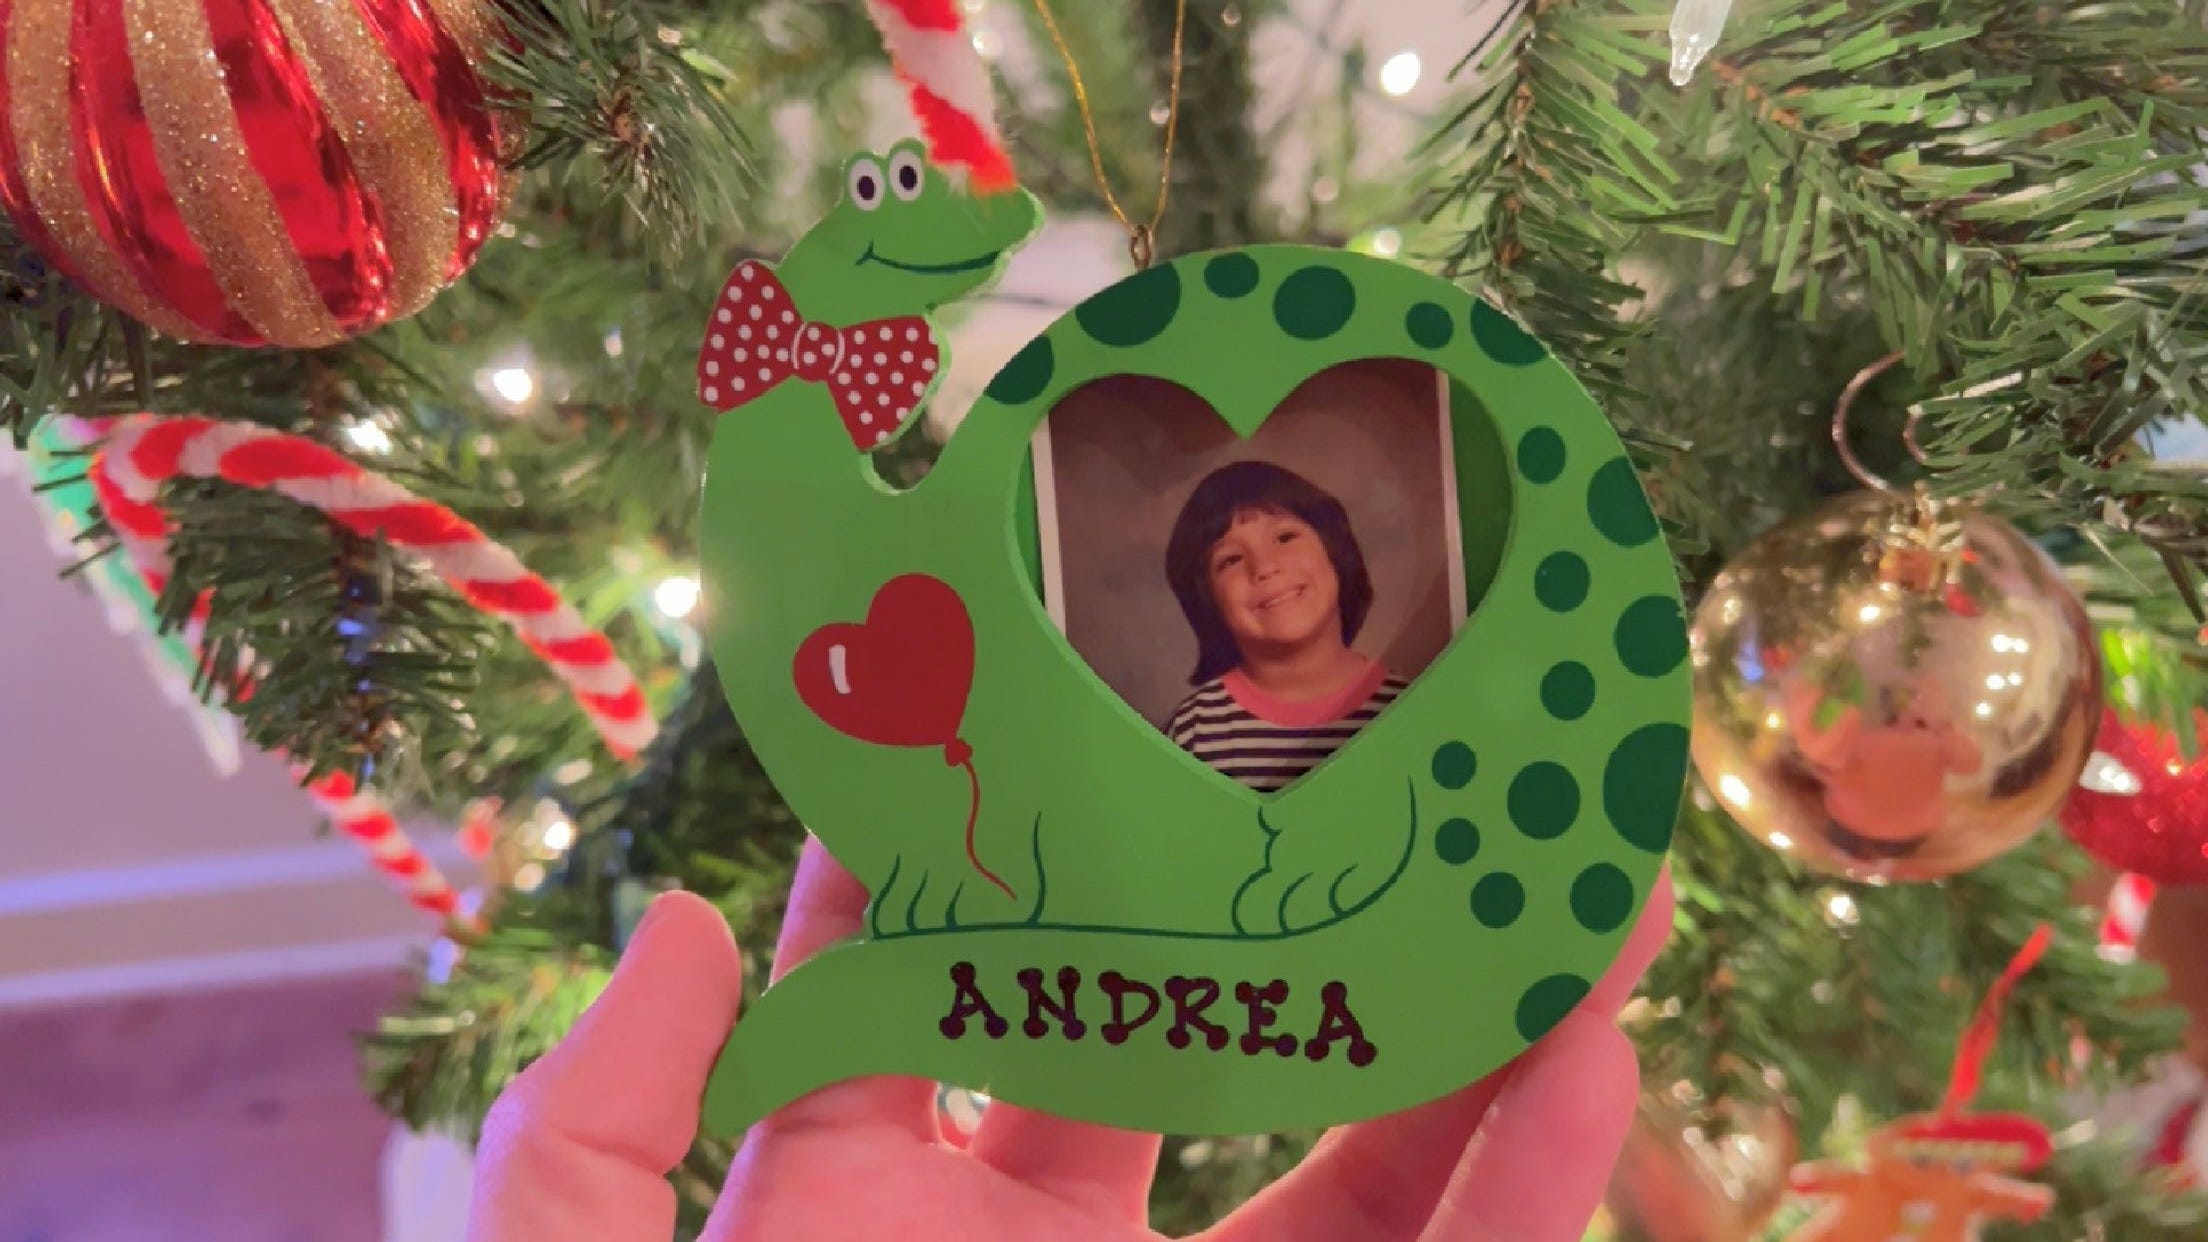 andrea valdez holding a christmas ornament that contains a photo of herself as a child